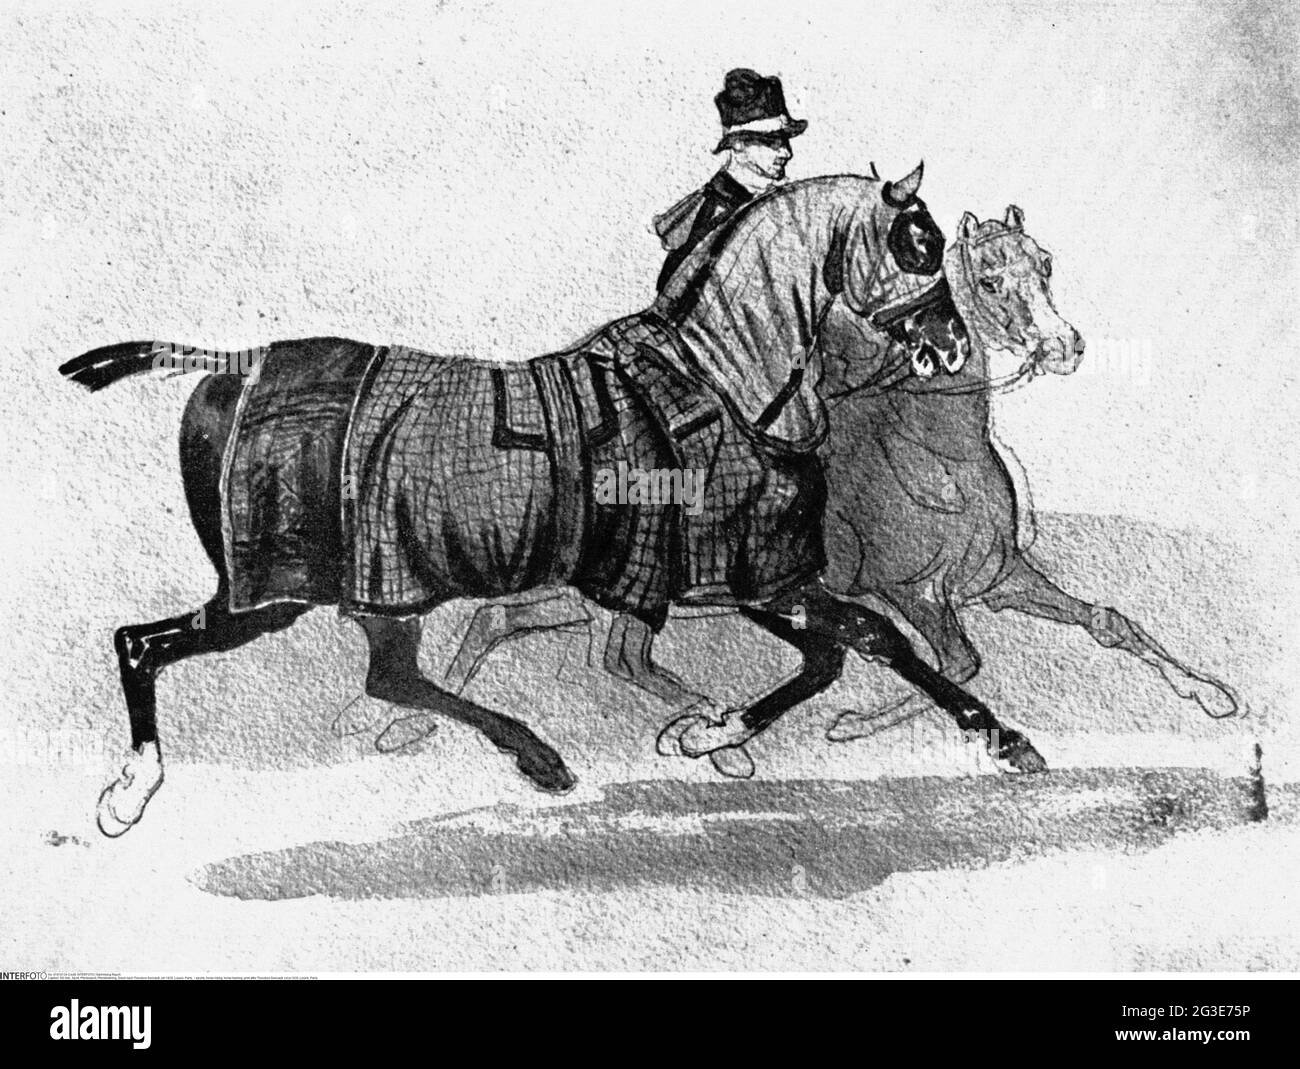 sports, horse-riding, horse training, print after Theodore Gericault, circa 1820, Louvre, Paris, ARTIST'S COPYRIGHT HAS NOT TO BE CLEARED Stock Photo